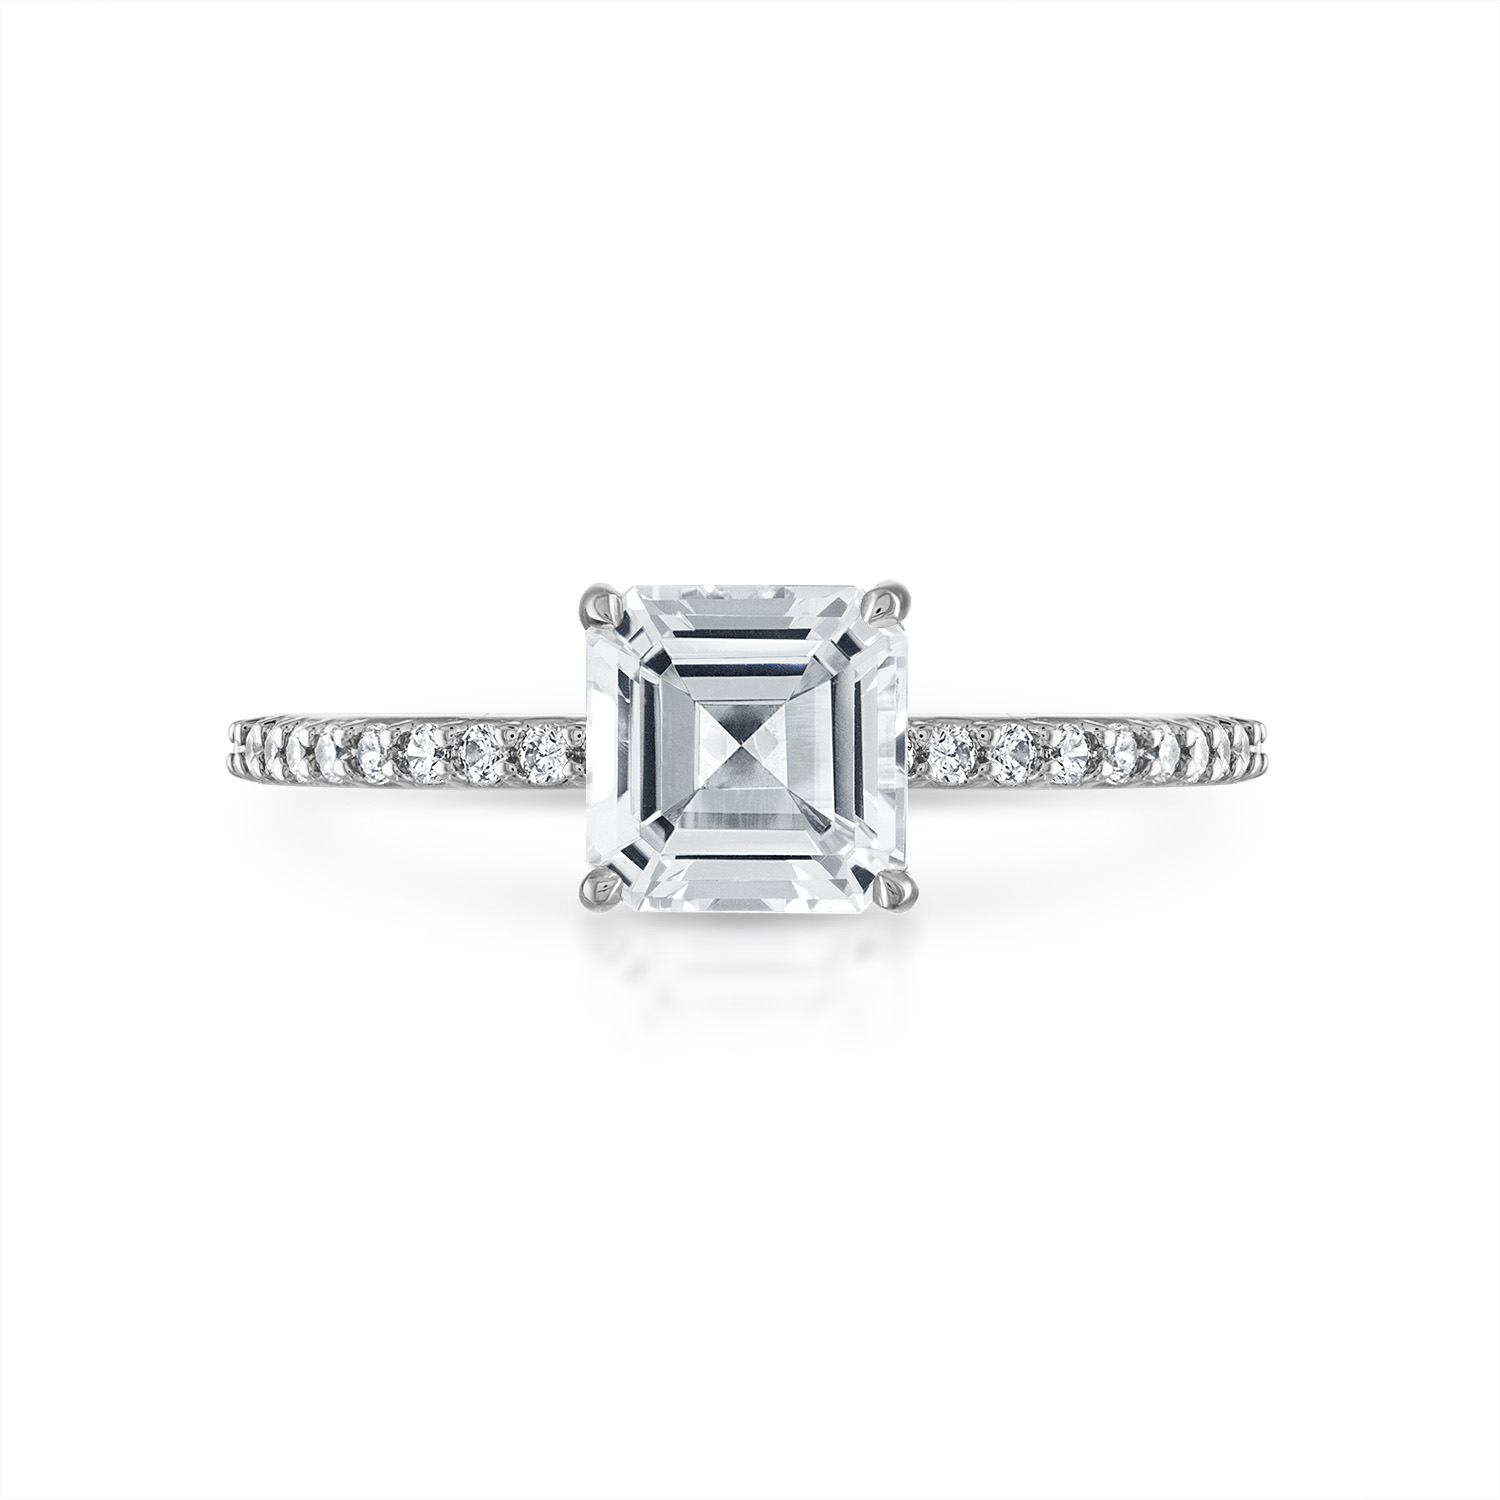 Asscher Pave with Pave Underbezel Engagement Ring in Platinum